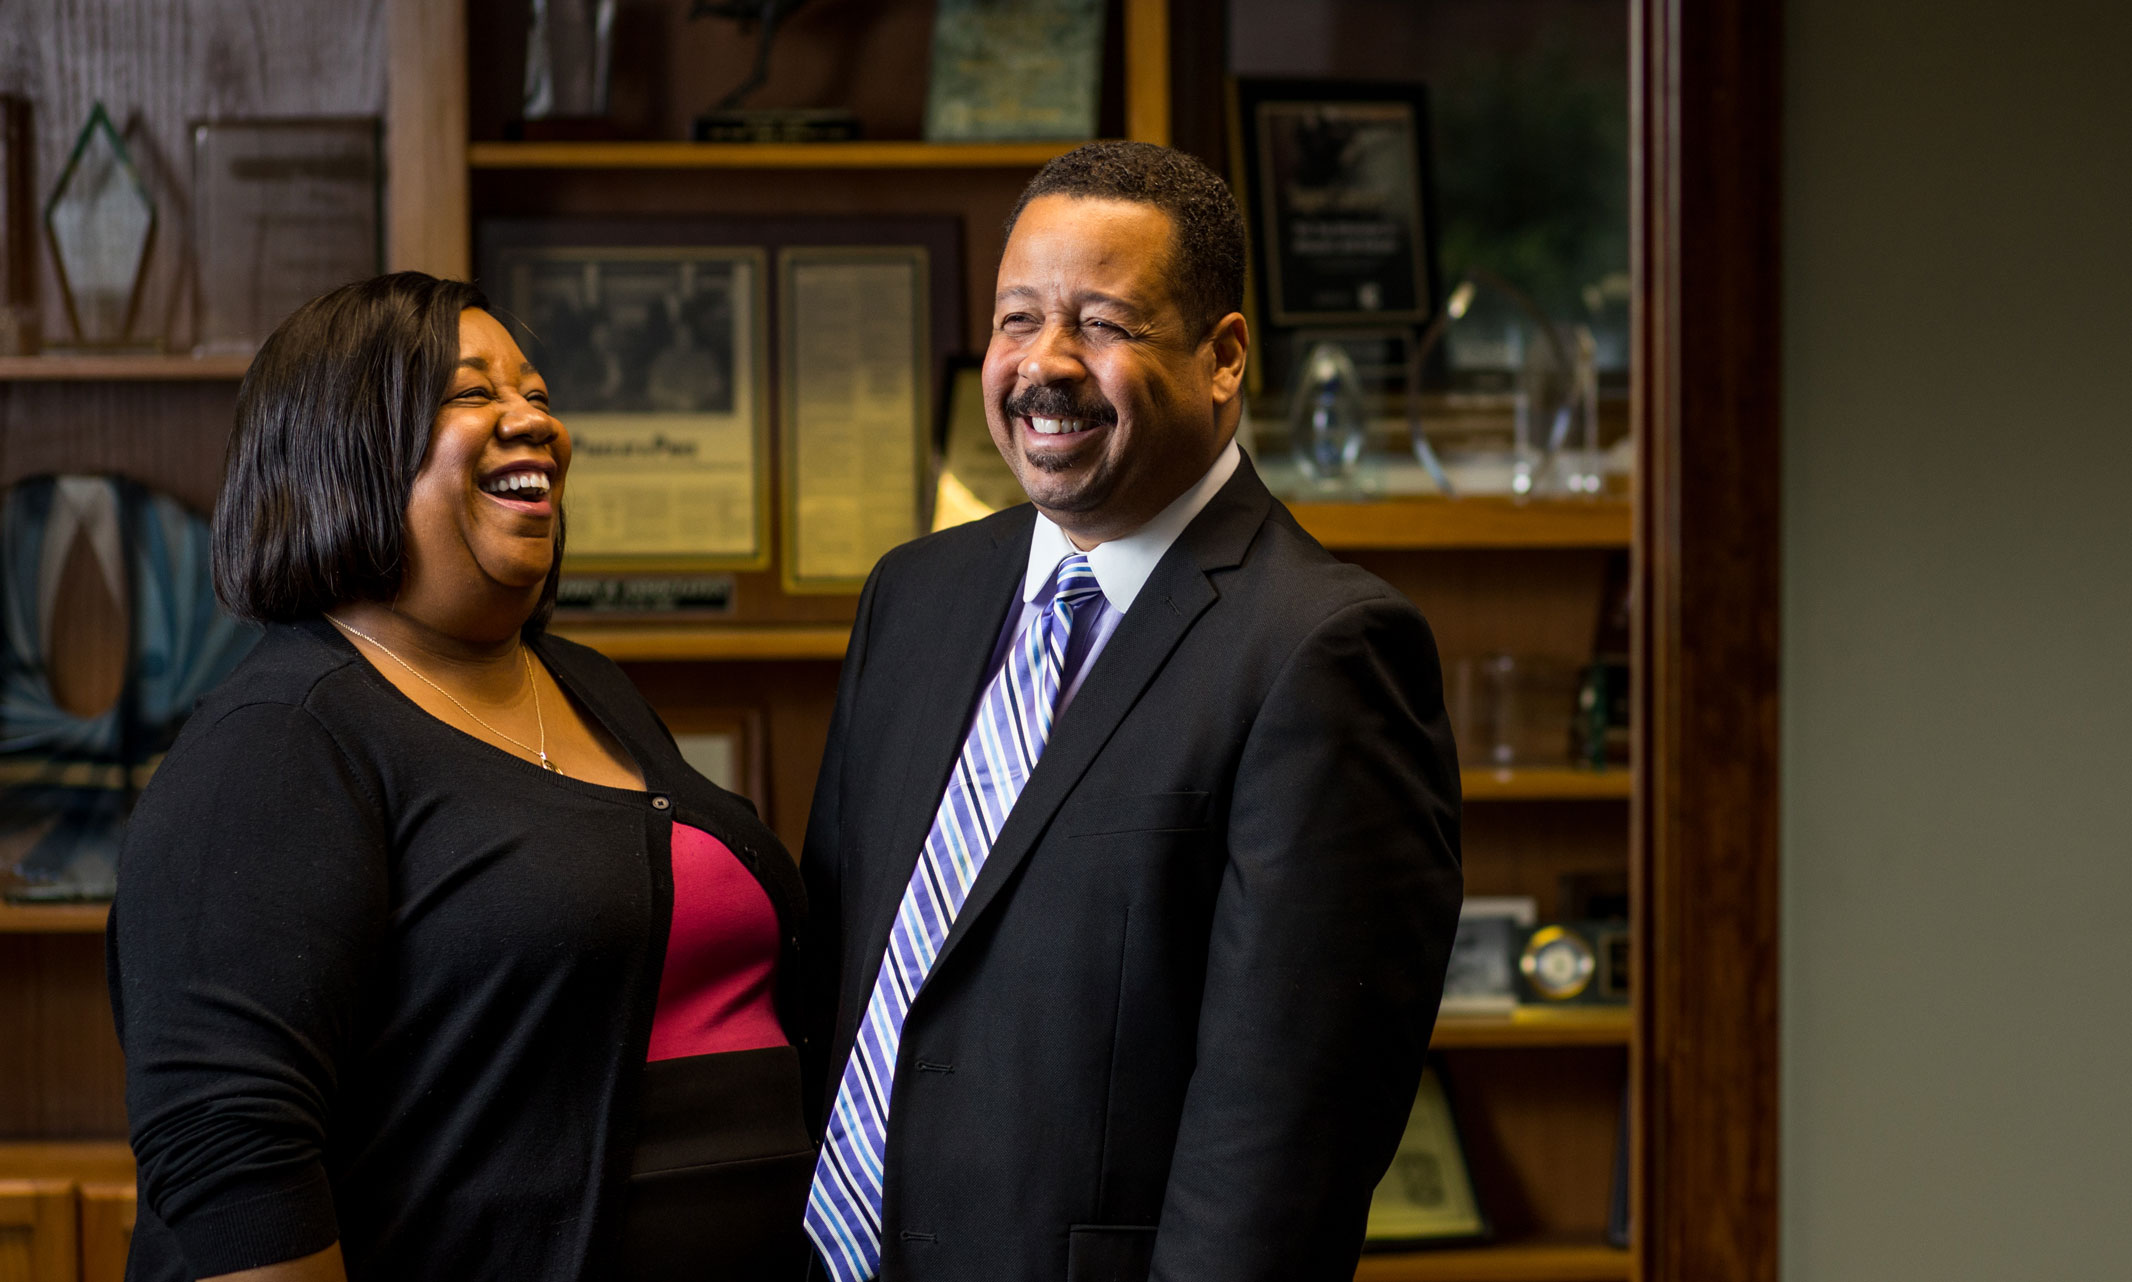 Dana and Keith Cutler laugh together in their law office.